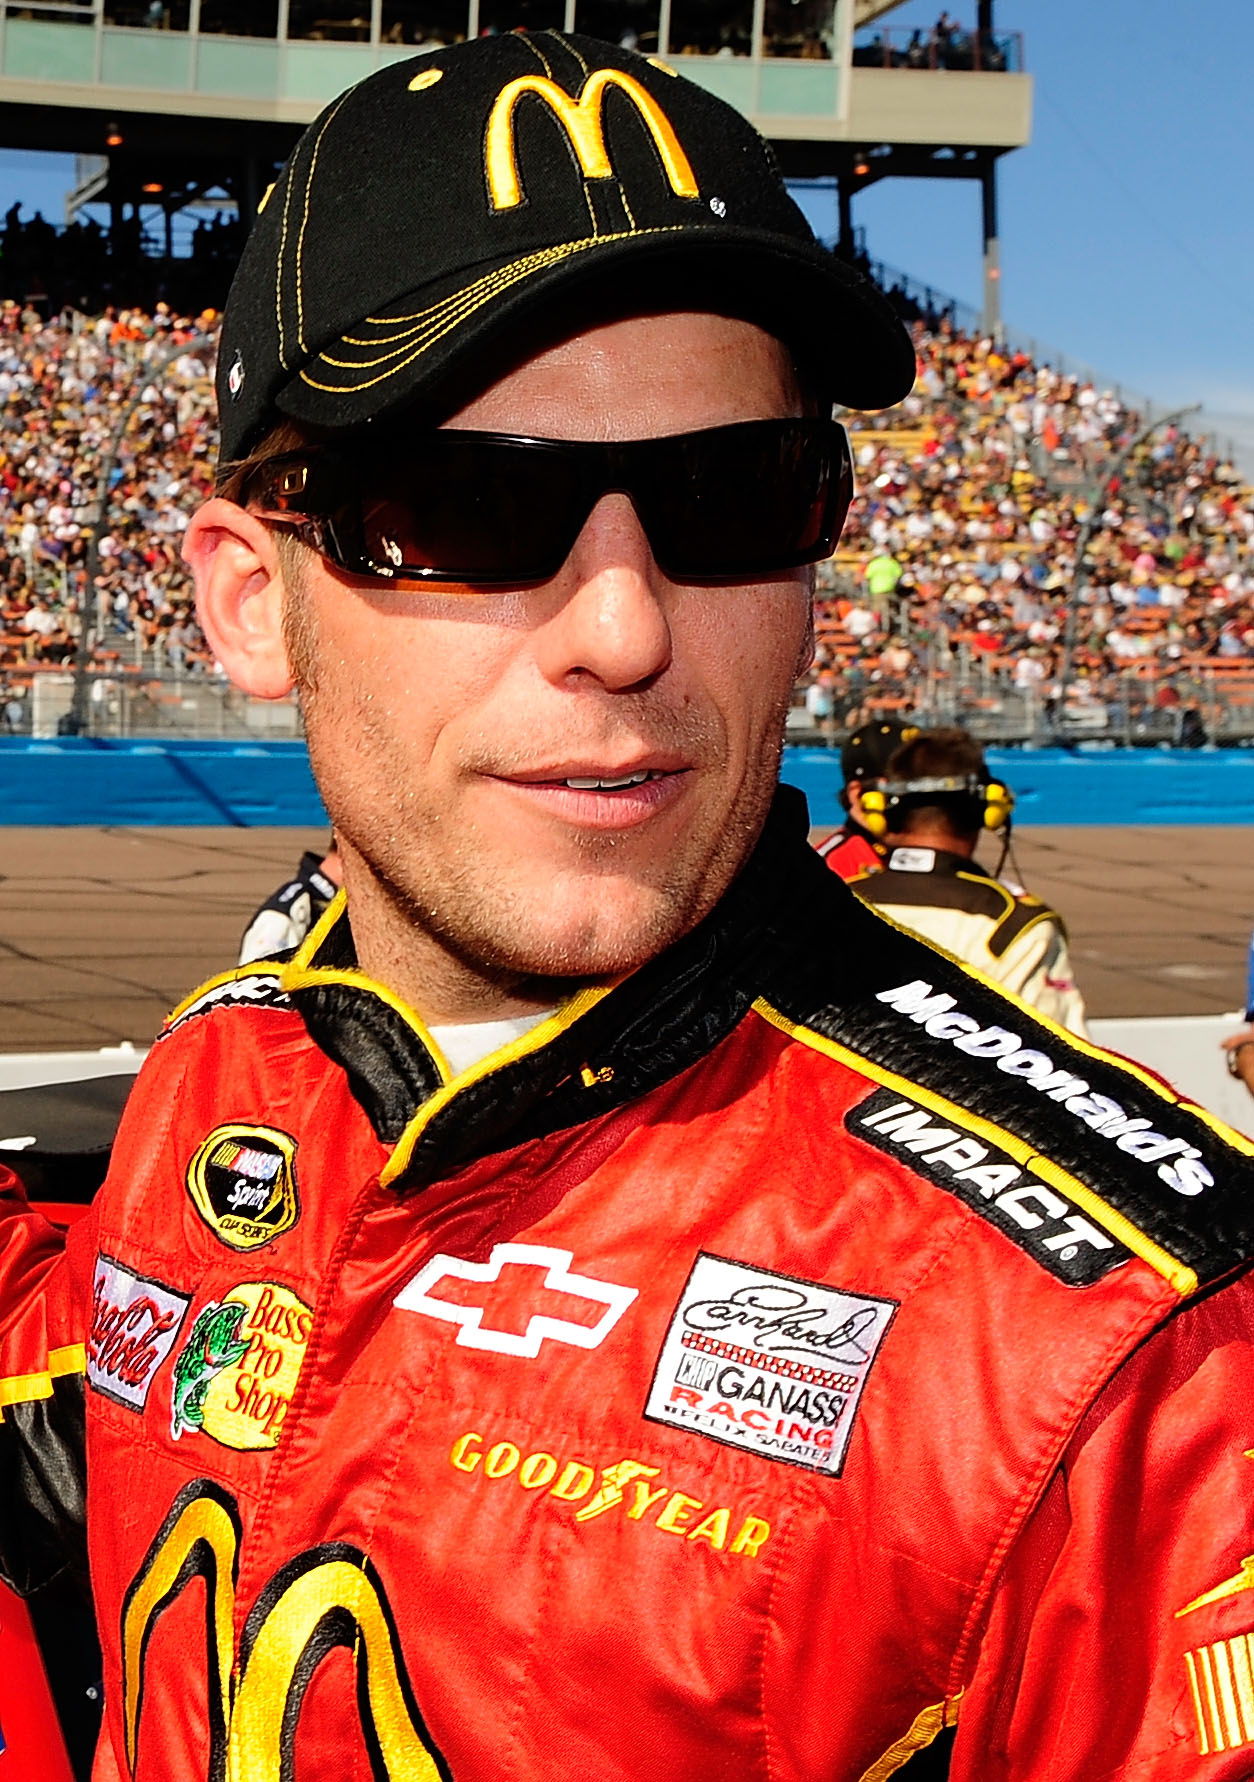 AVONDALE, AZ - NOVEMBER 14:  Jamie McMurray, driver of the #1 McDonald's Chevrolet, stands on the starting grid prior to the NASCAR Sprint Cup Series Kobalt Tools 500 at Phoenix International Raceway on November 14, 2010 in Avondale, Arizona.  (Photo by R